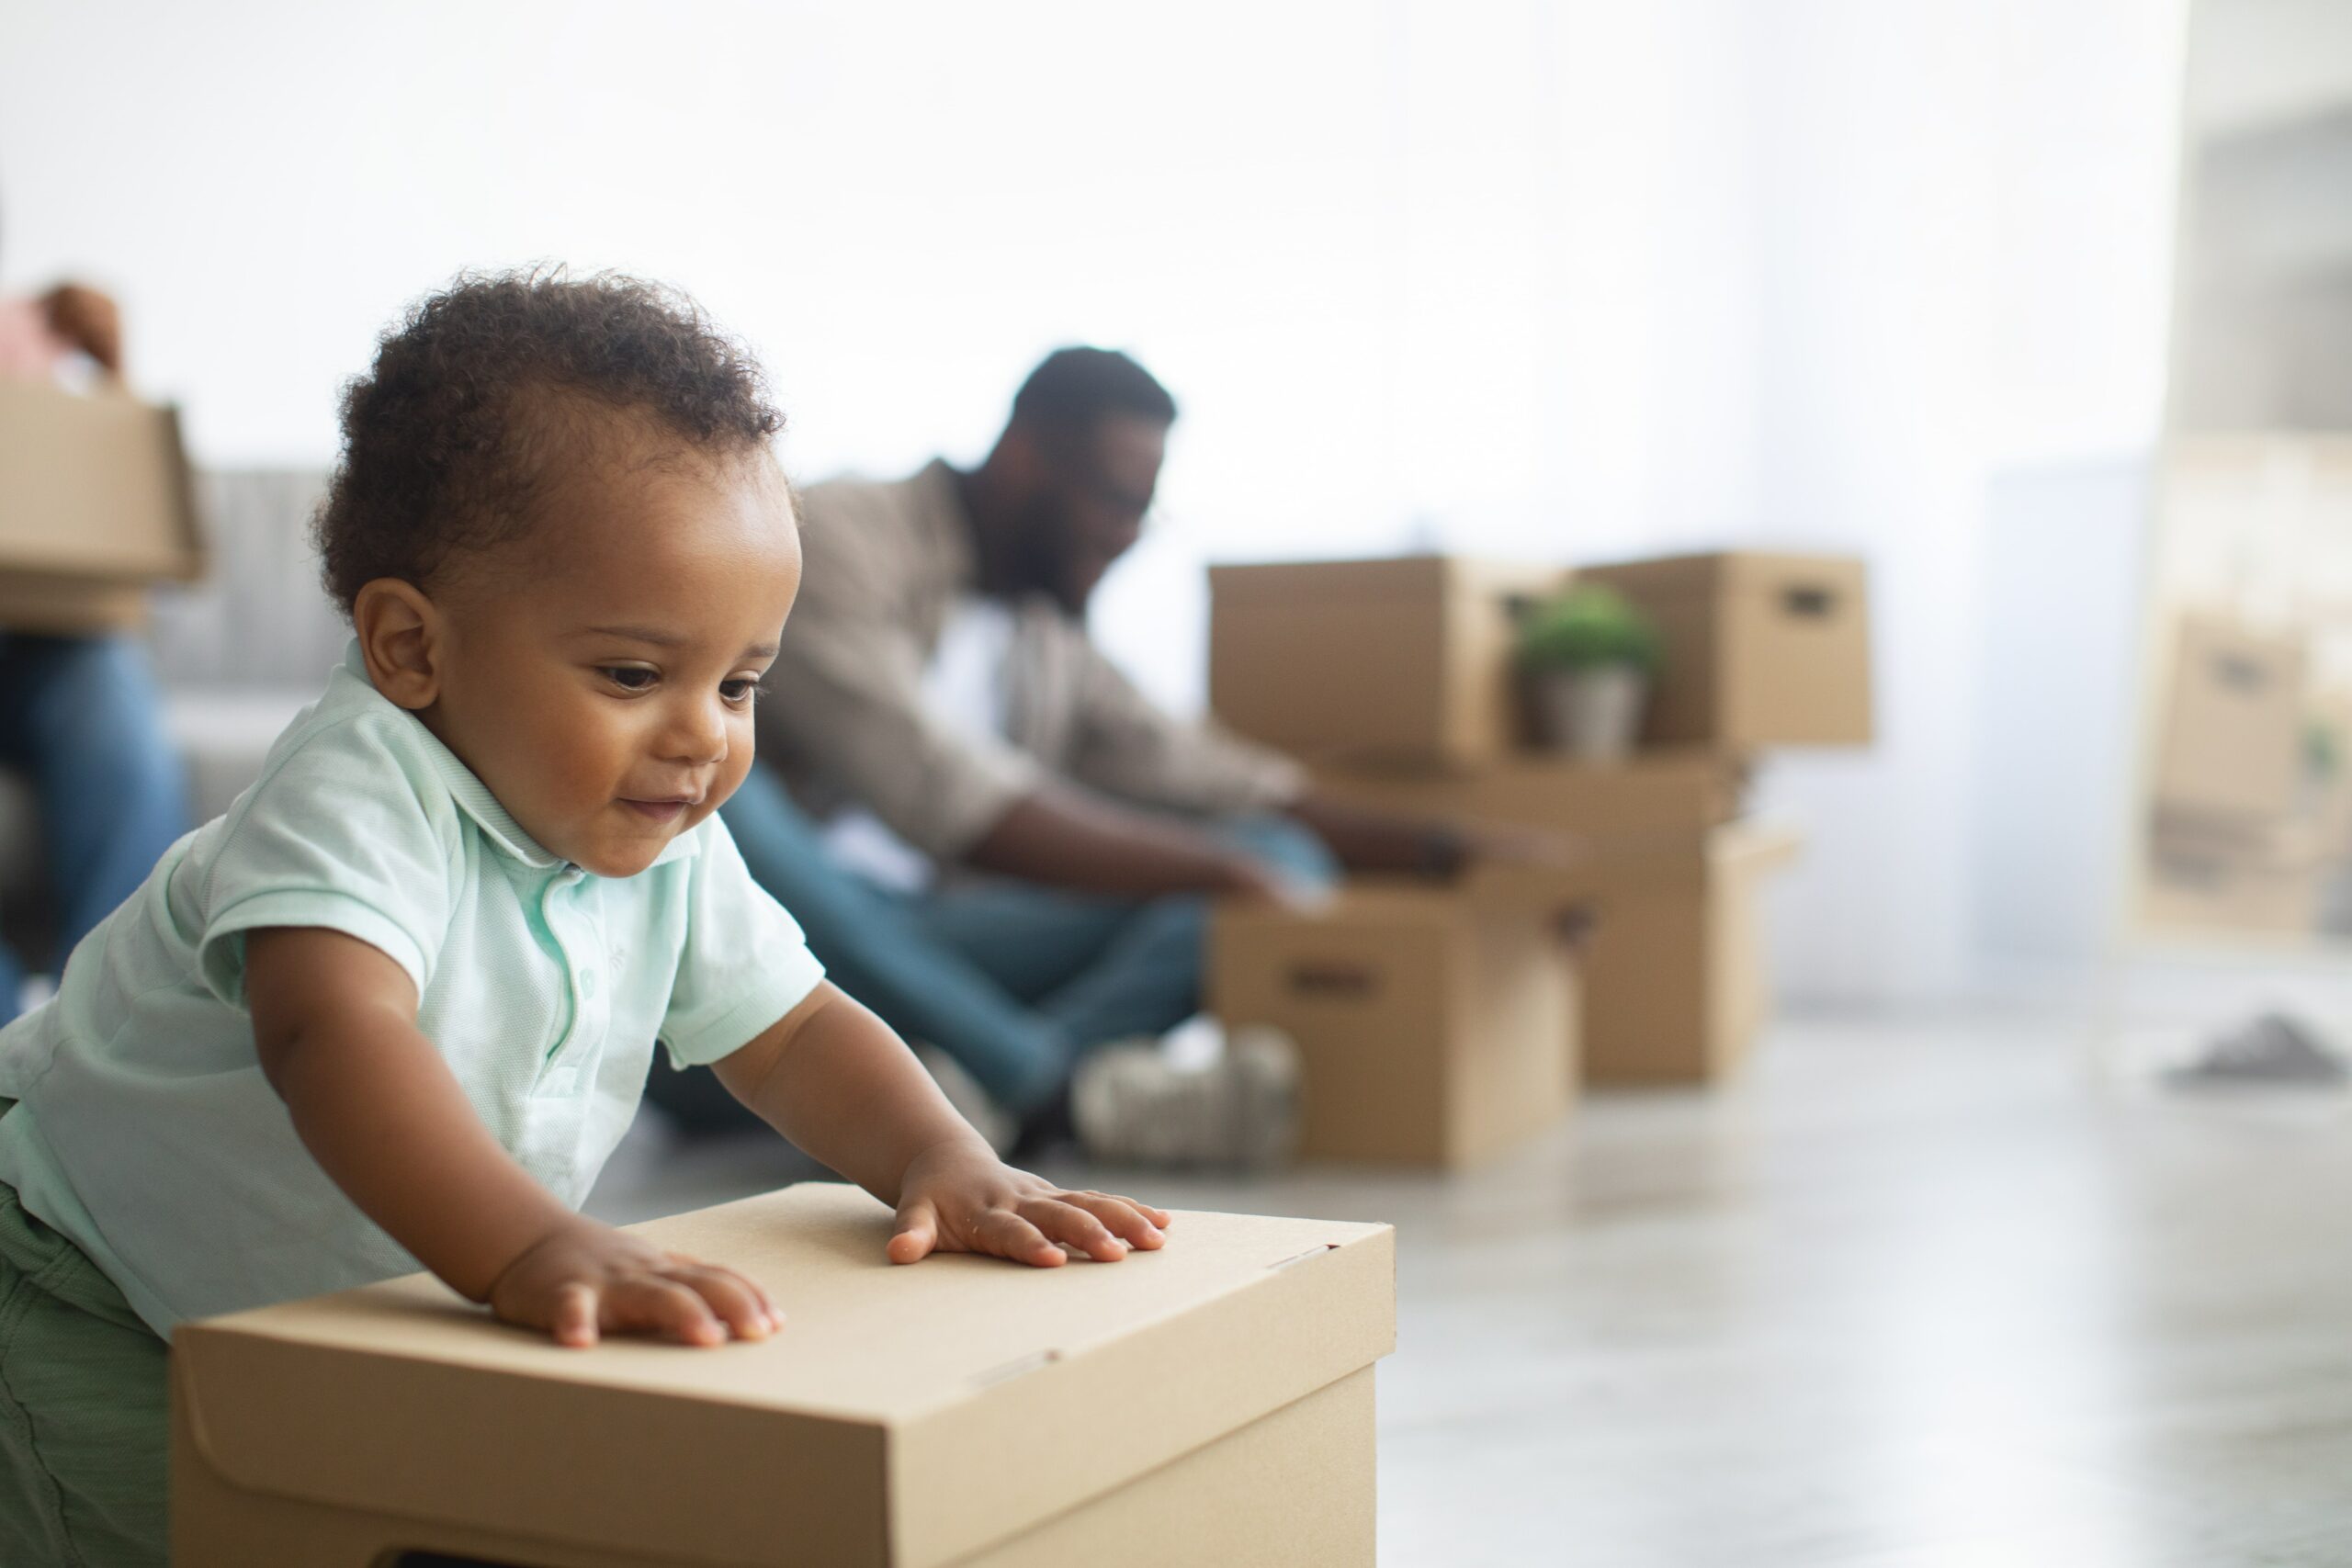 toddler playing with a moving box while the rest of the family is packing boxes